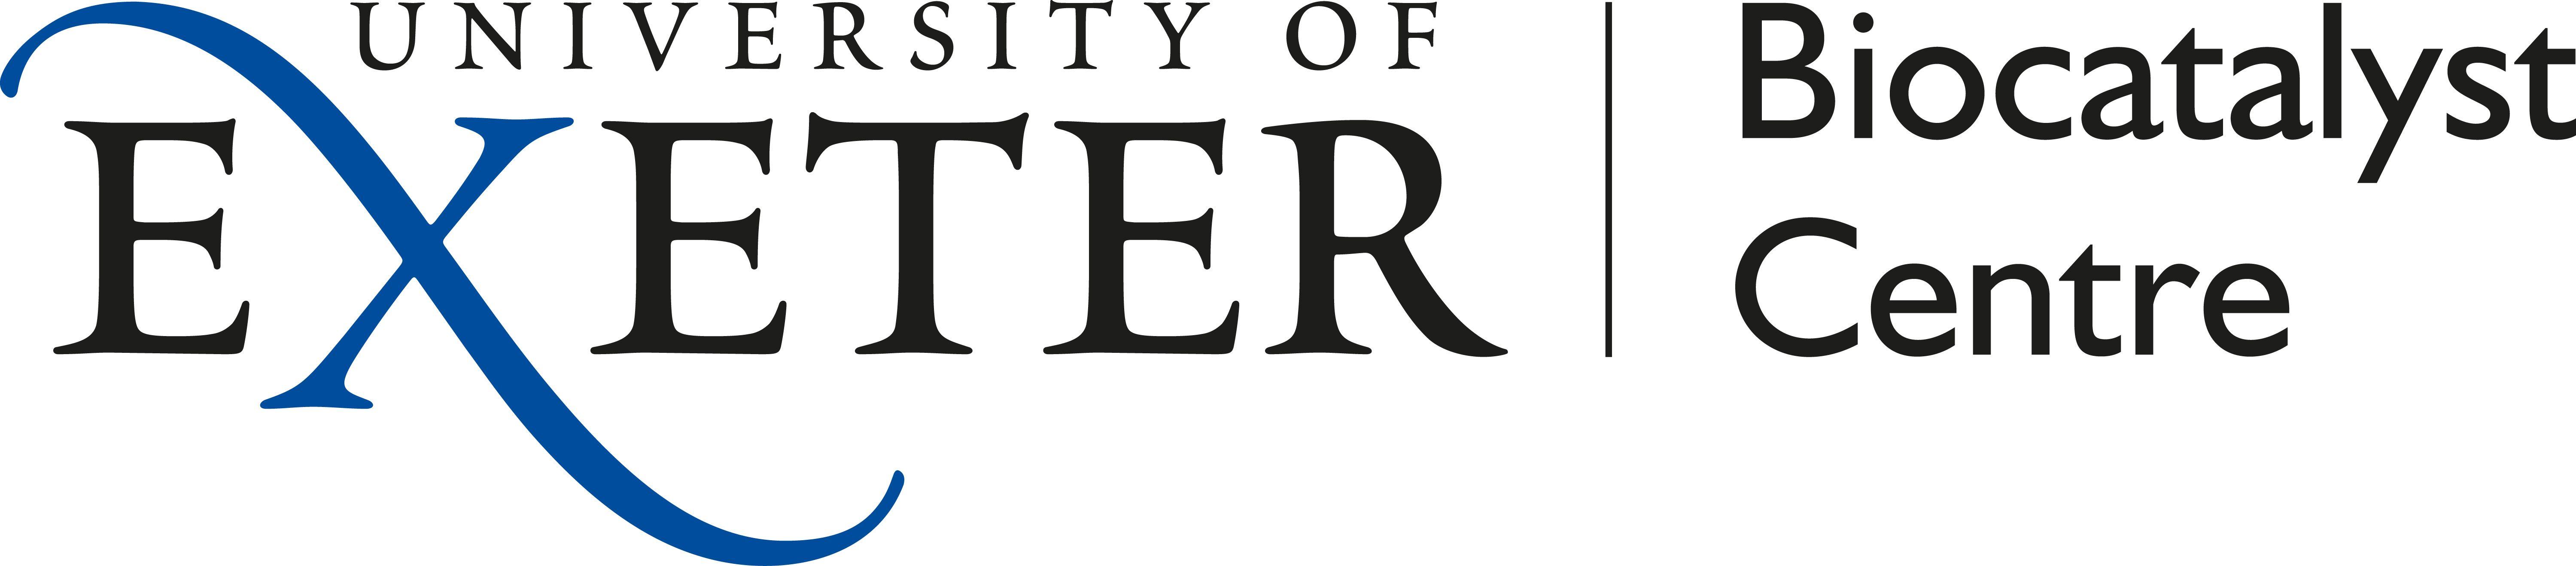 Exeter Logo - Downloads. Communication and Marketing Services. University of Exeter